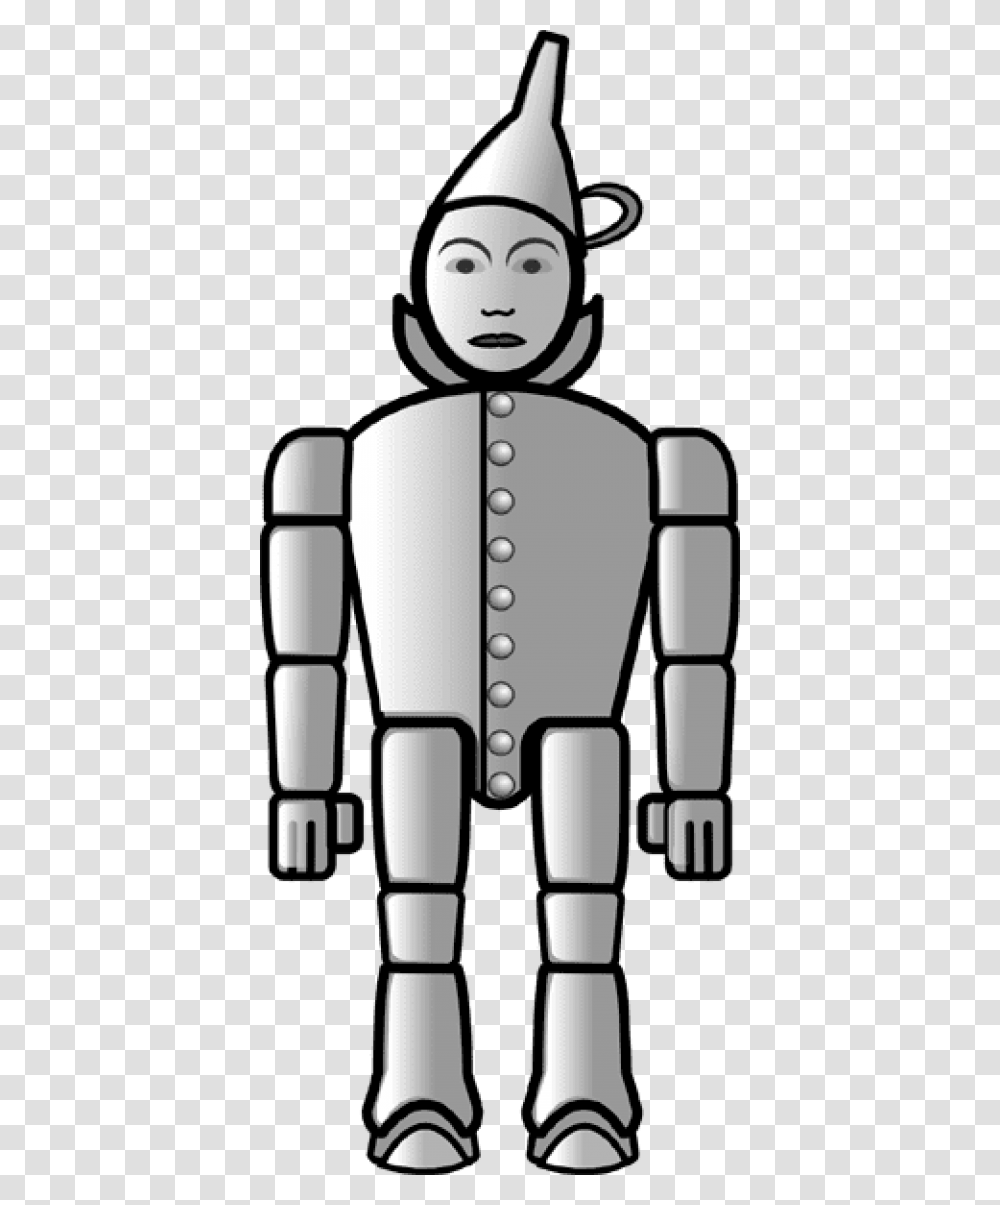 Free Download Tin Man Images Background Tin Man, Face, Architecture, Building, Nature Transparent Png